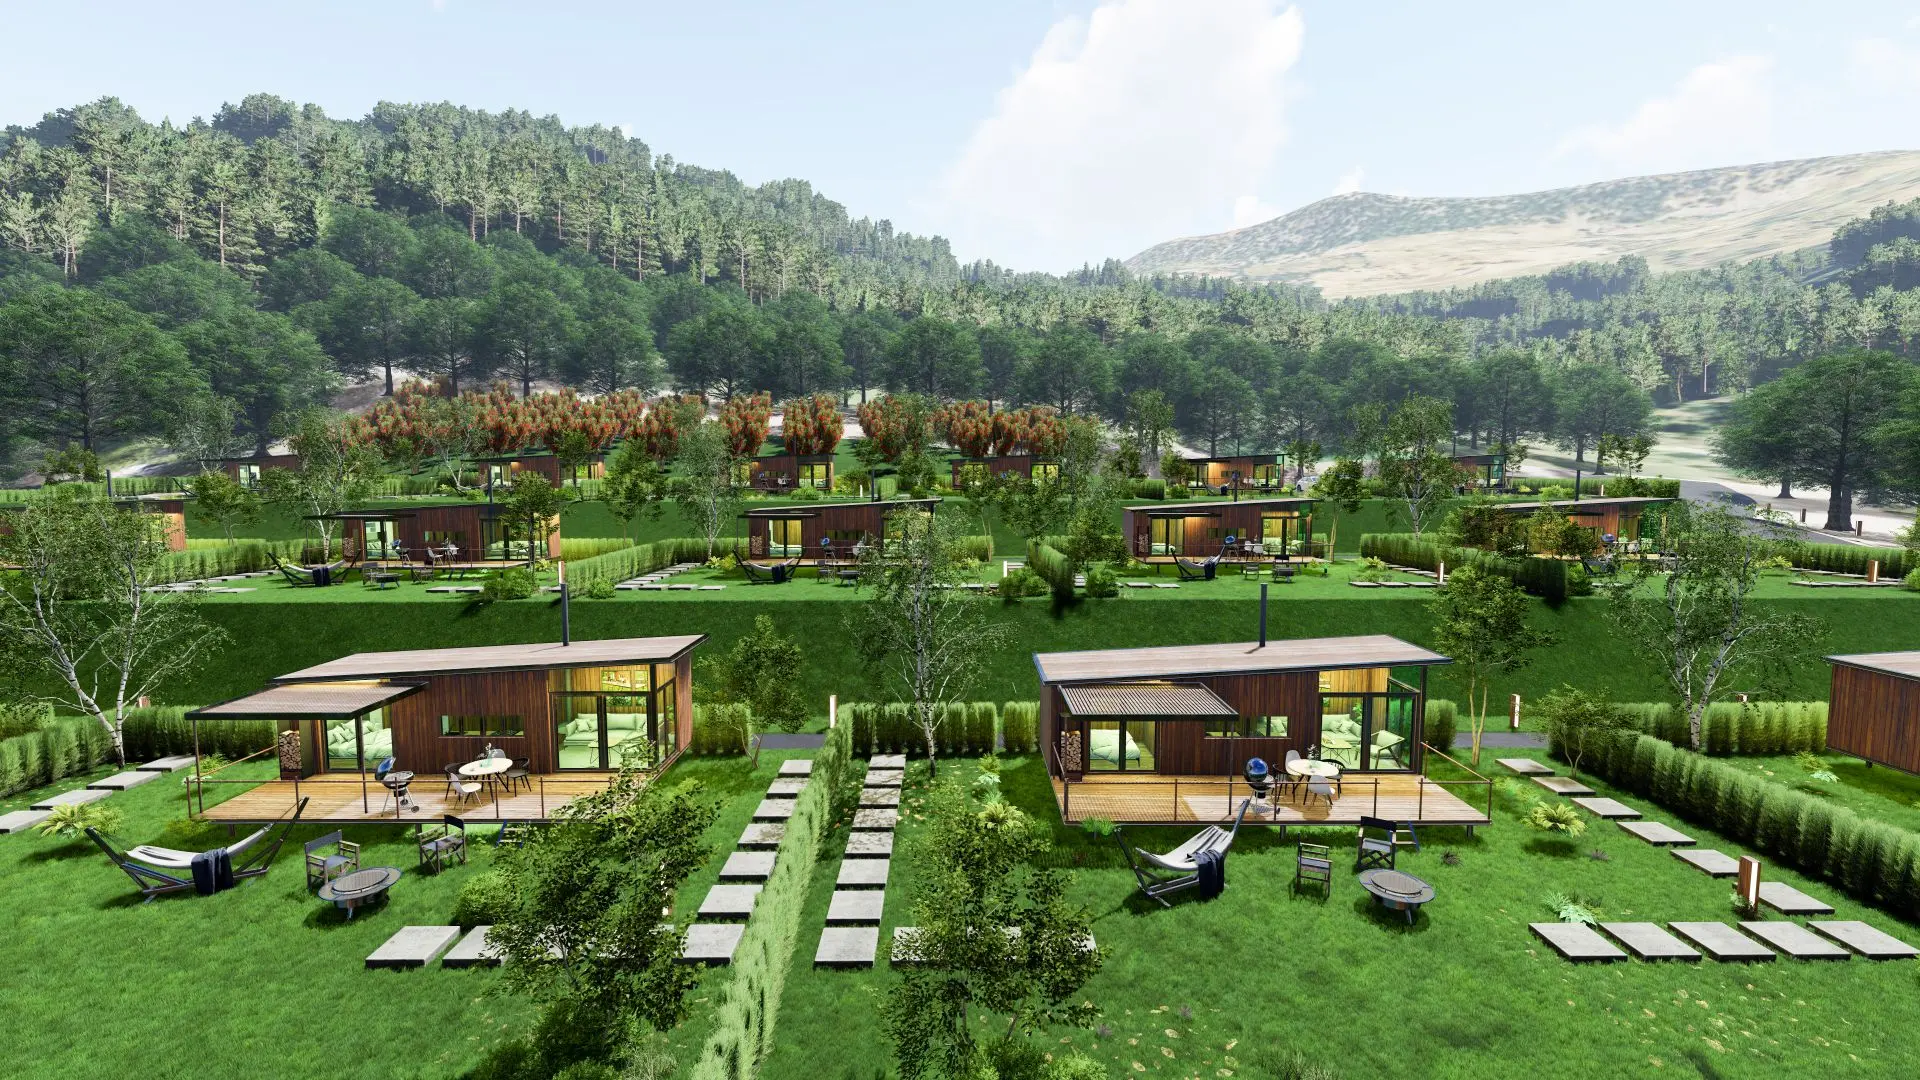 COMPLEX INTO THE MAGNIFICENT NATURE IN THE TAURUS MOUNTAINS